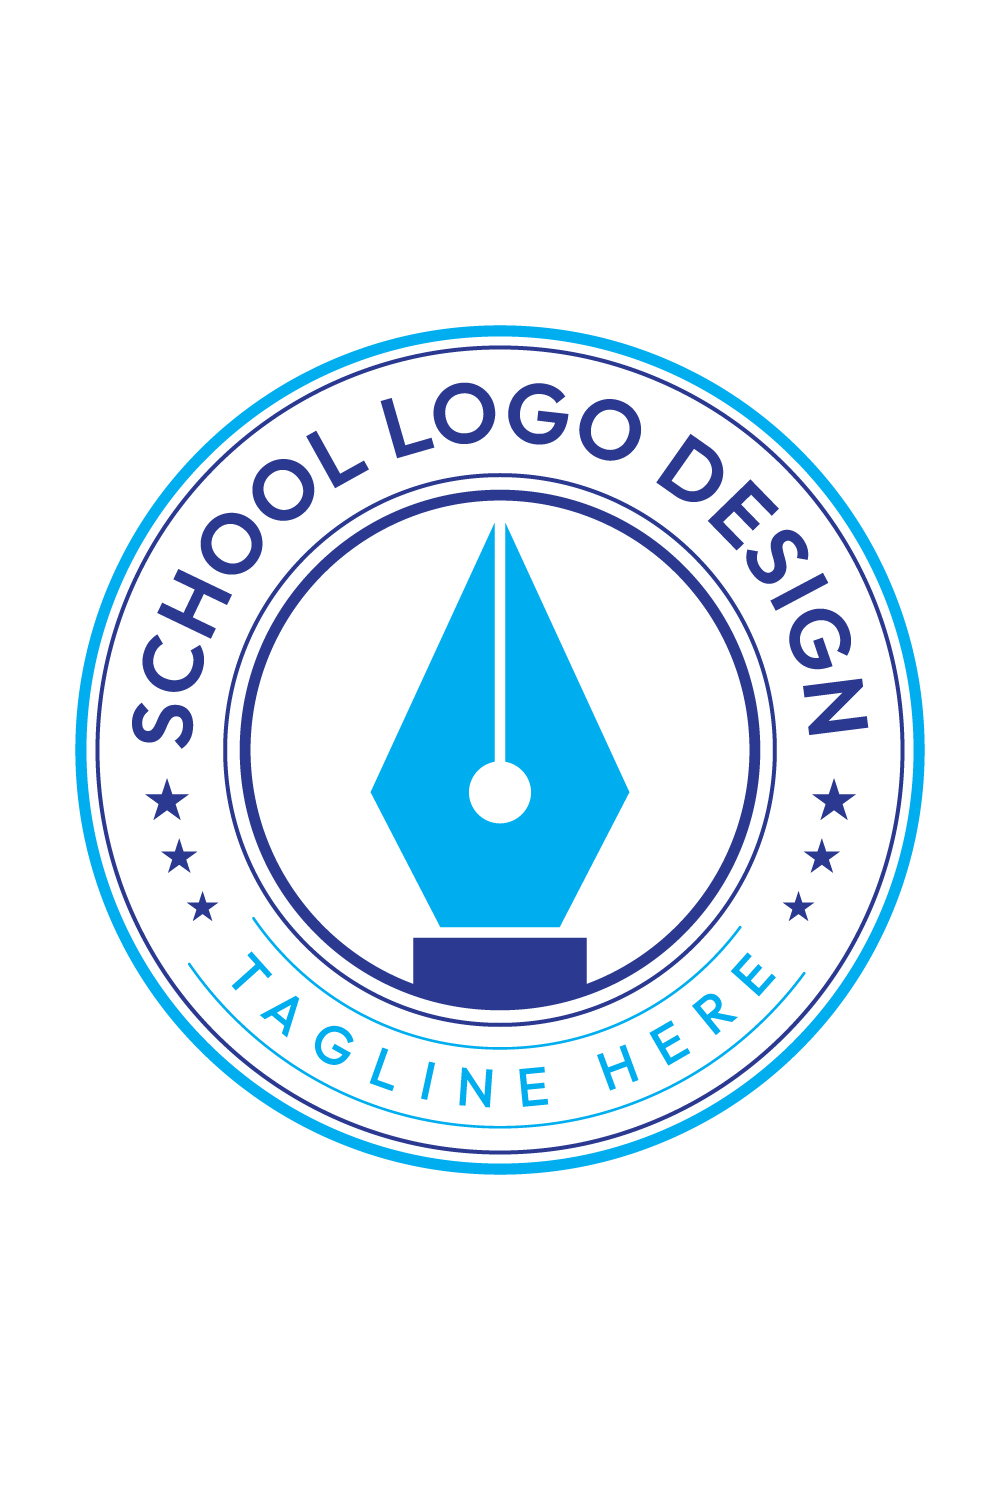 Ultimate Master Bundle for Academy, School, and Education Logo Designs pinterest preview image.